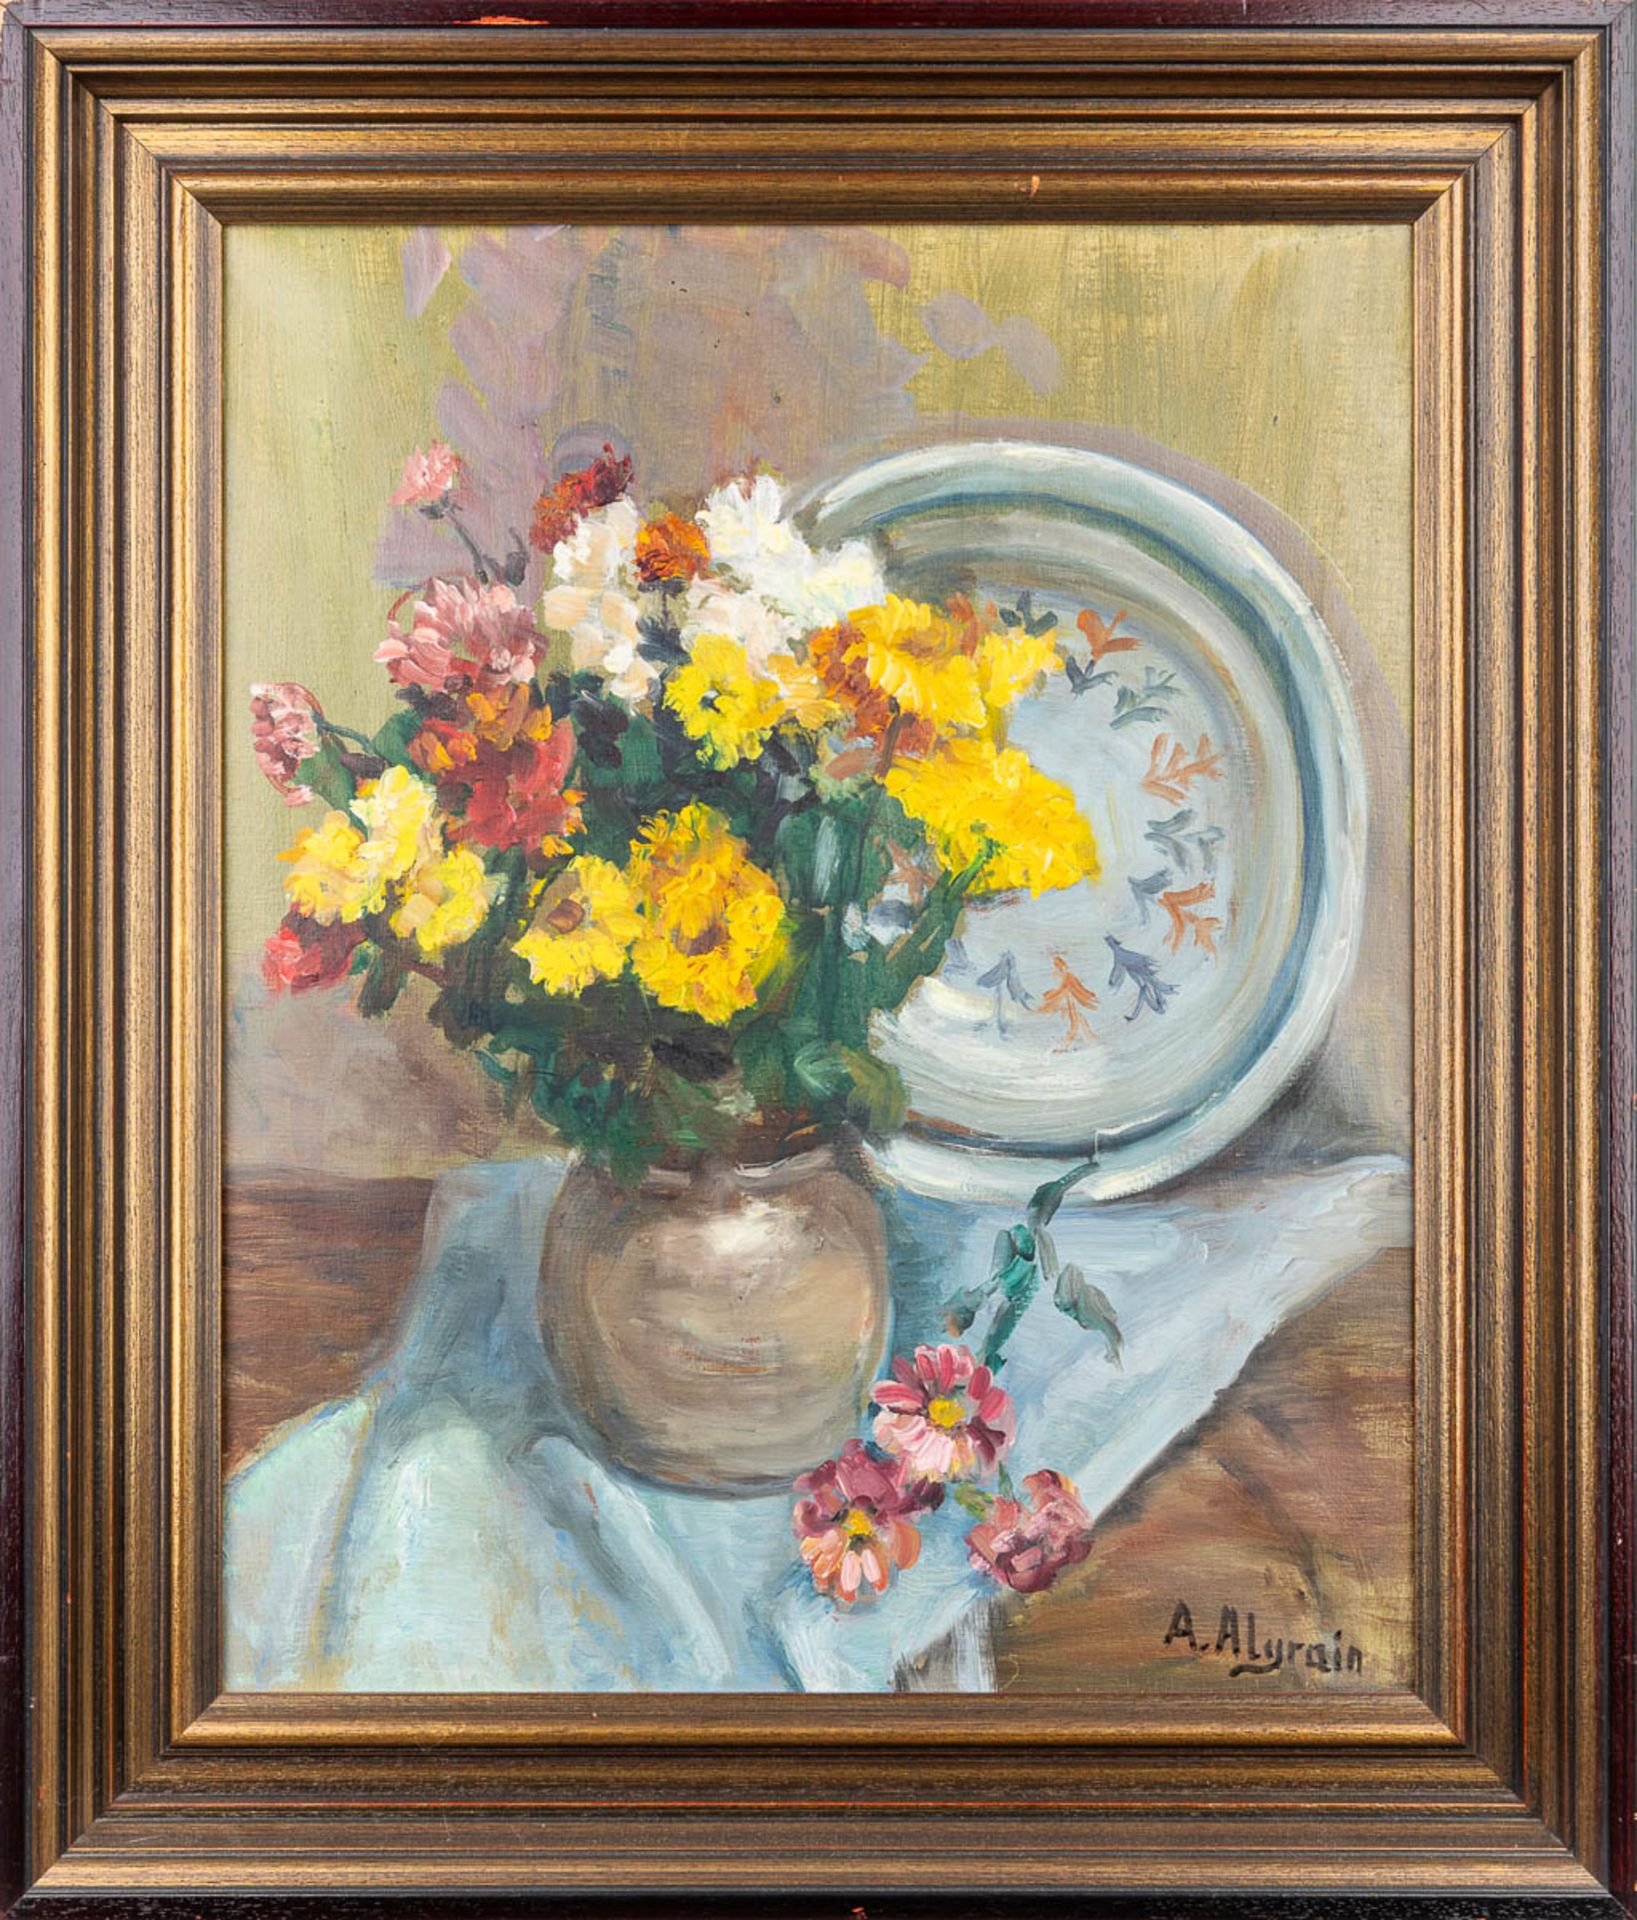 Andrée ALGRAIN (1905-1999) 'Still life' a painting, oil on canvas. (45 x 55 cm) - Image 3 of 8